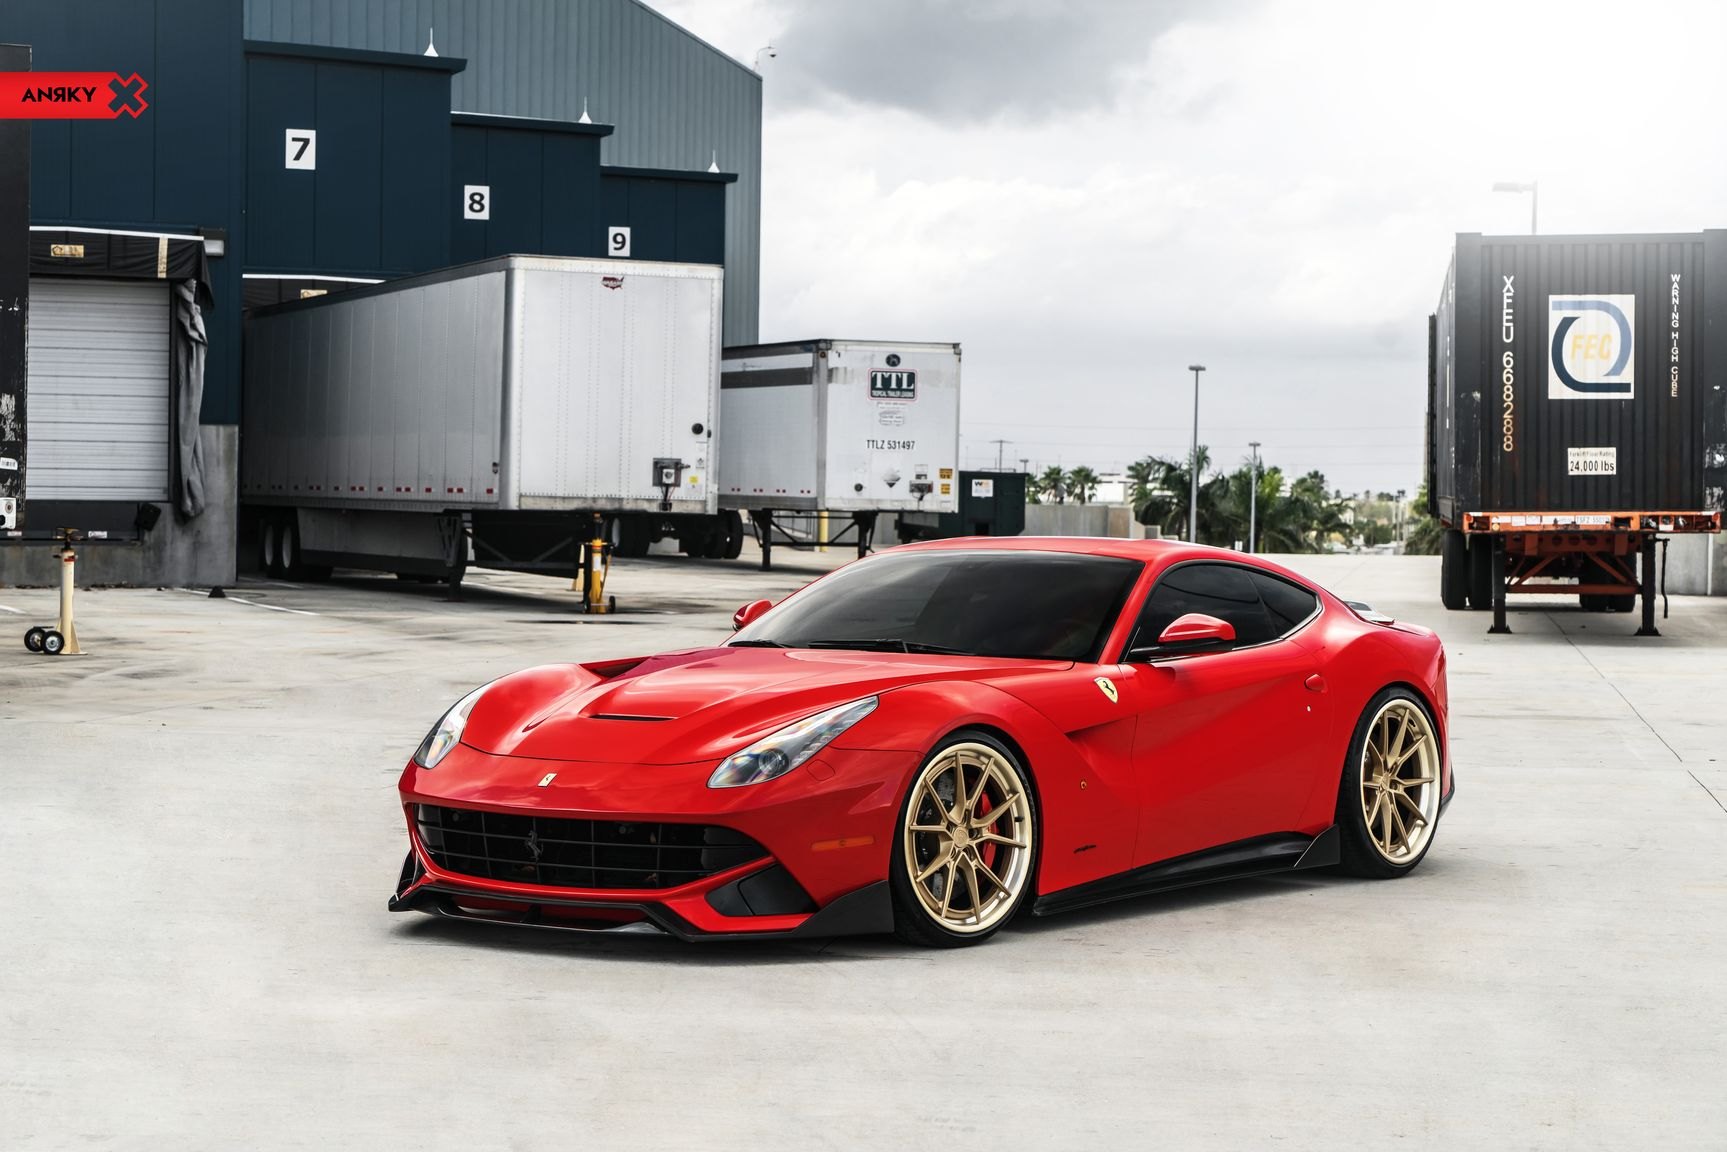 Crystal Clear LED Headlights on Red Ferrari F12 - Photo by Anrky Wheels